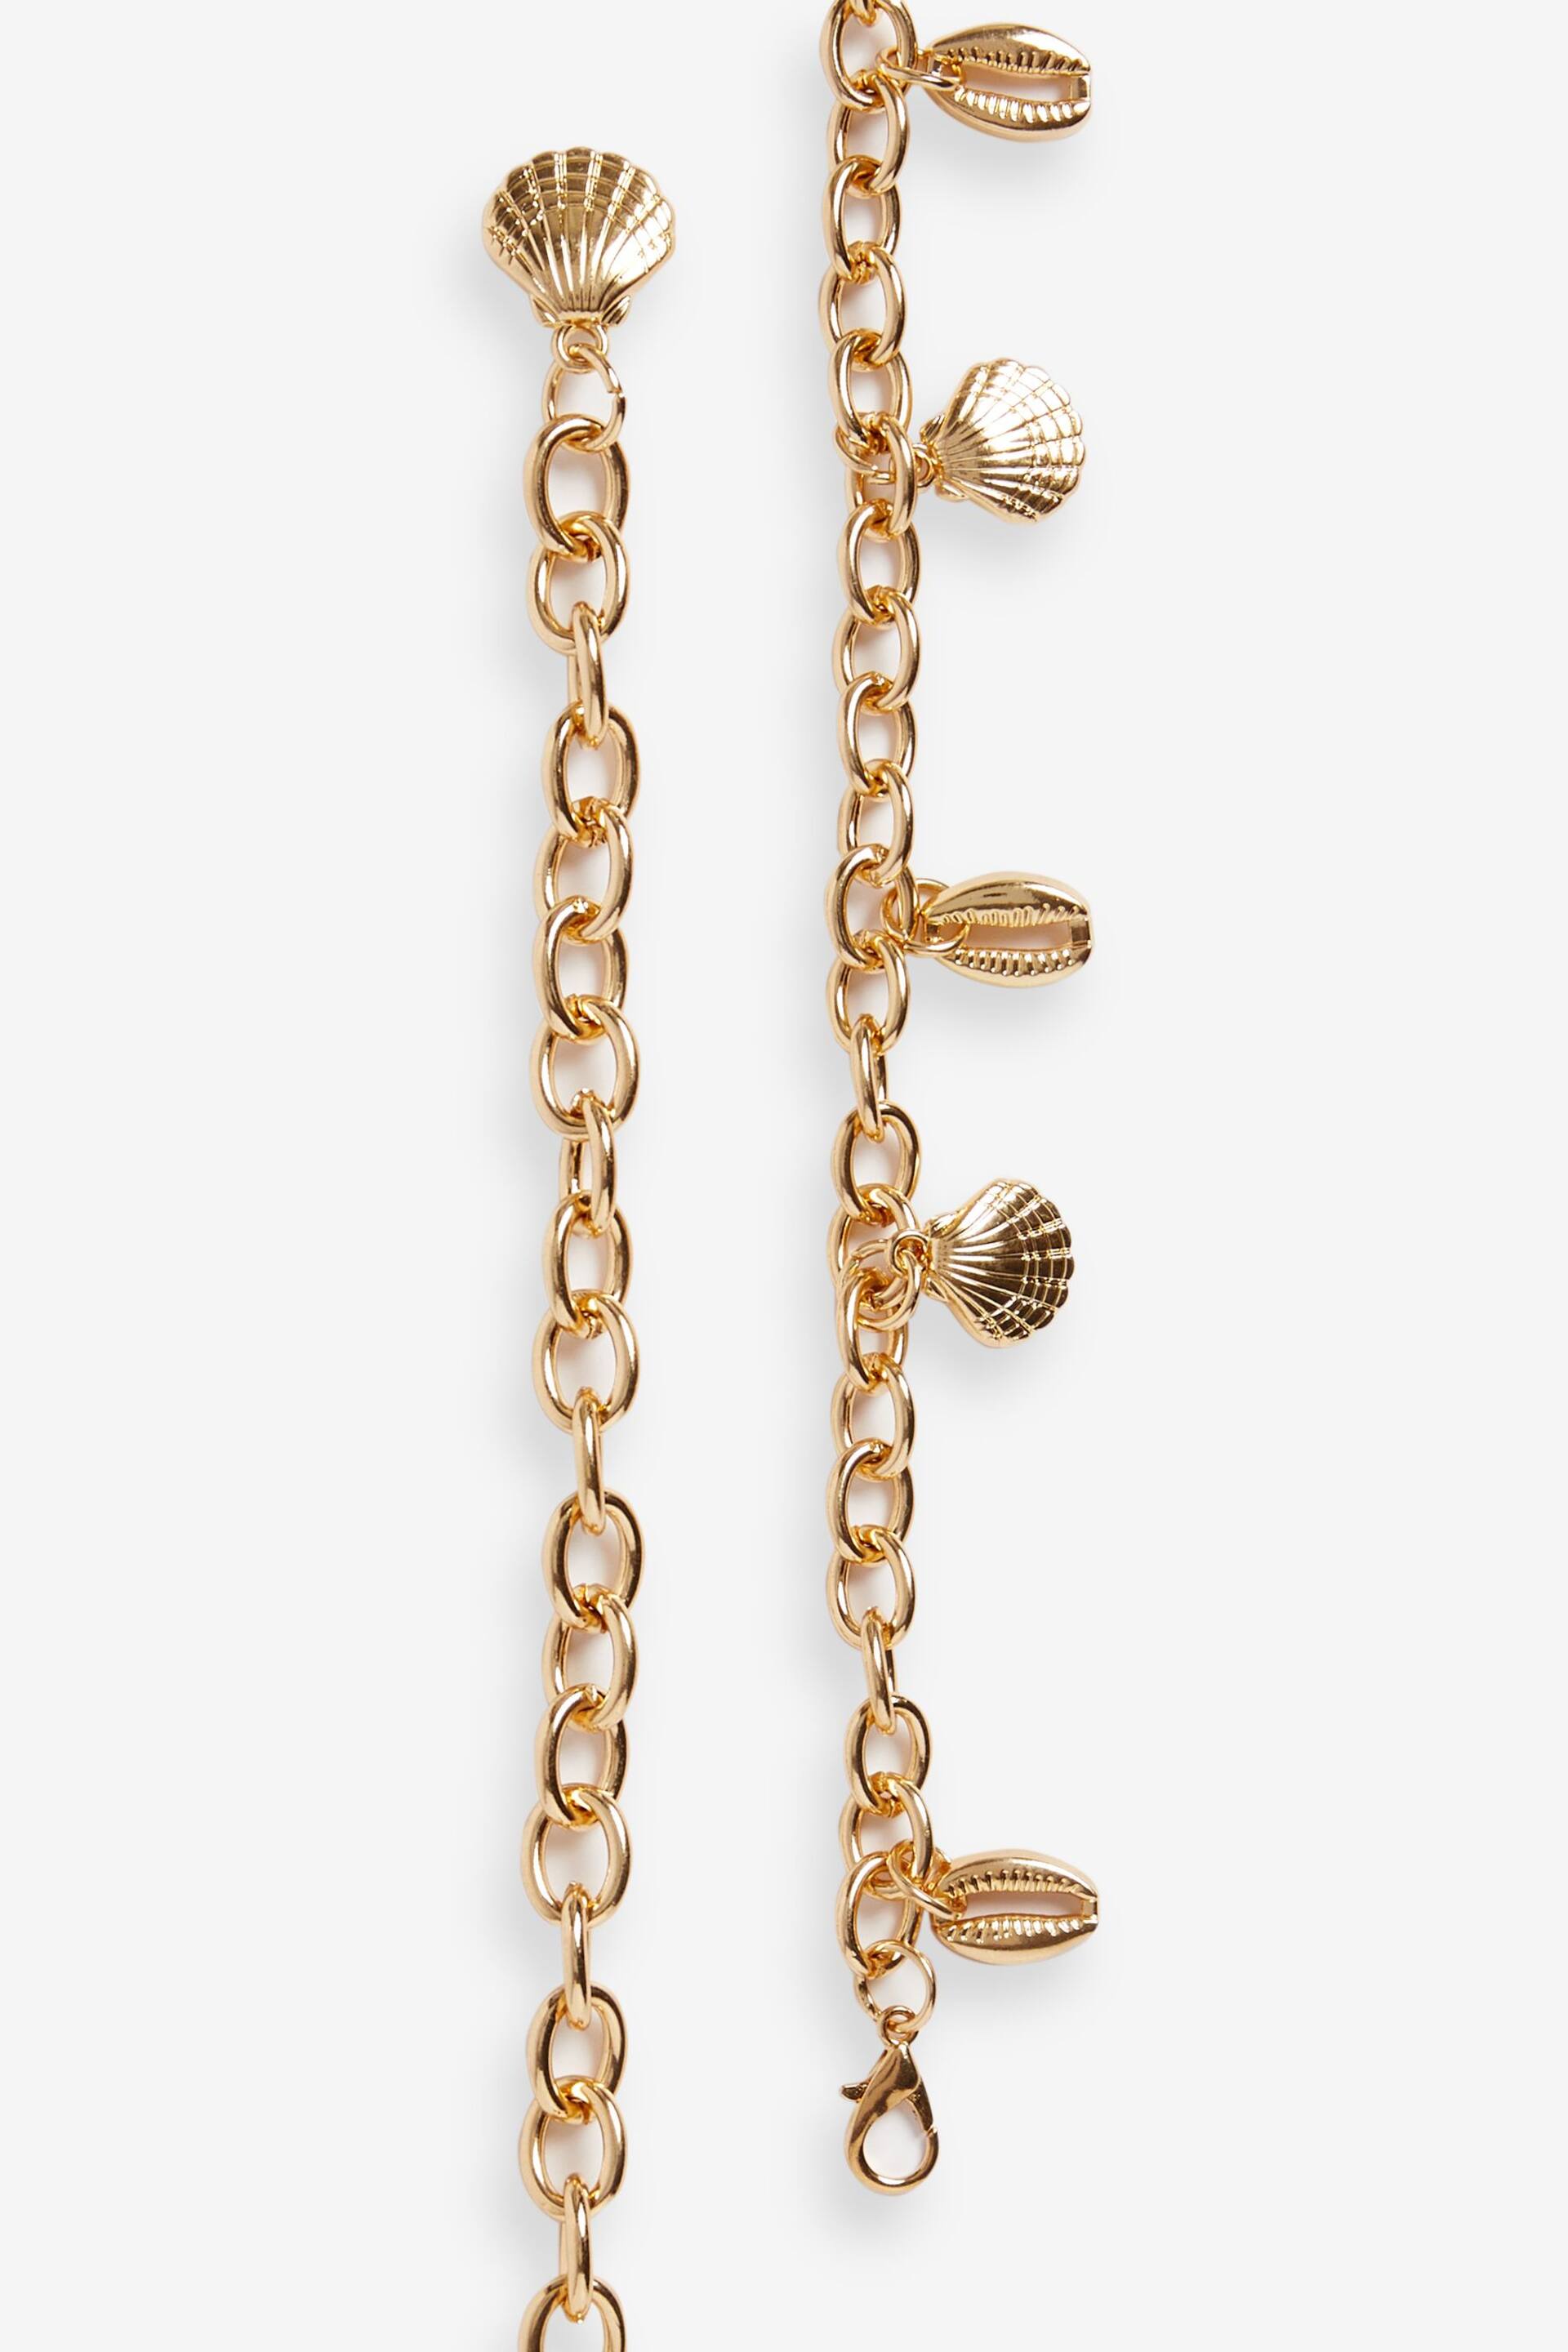 Gold Shell Chain Belt - Image 4 of 4